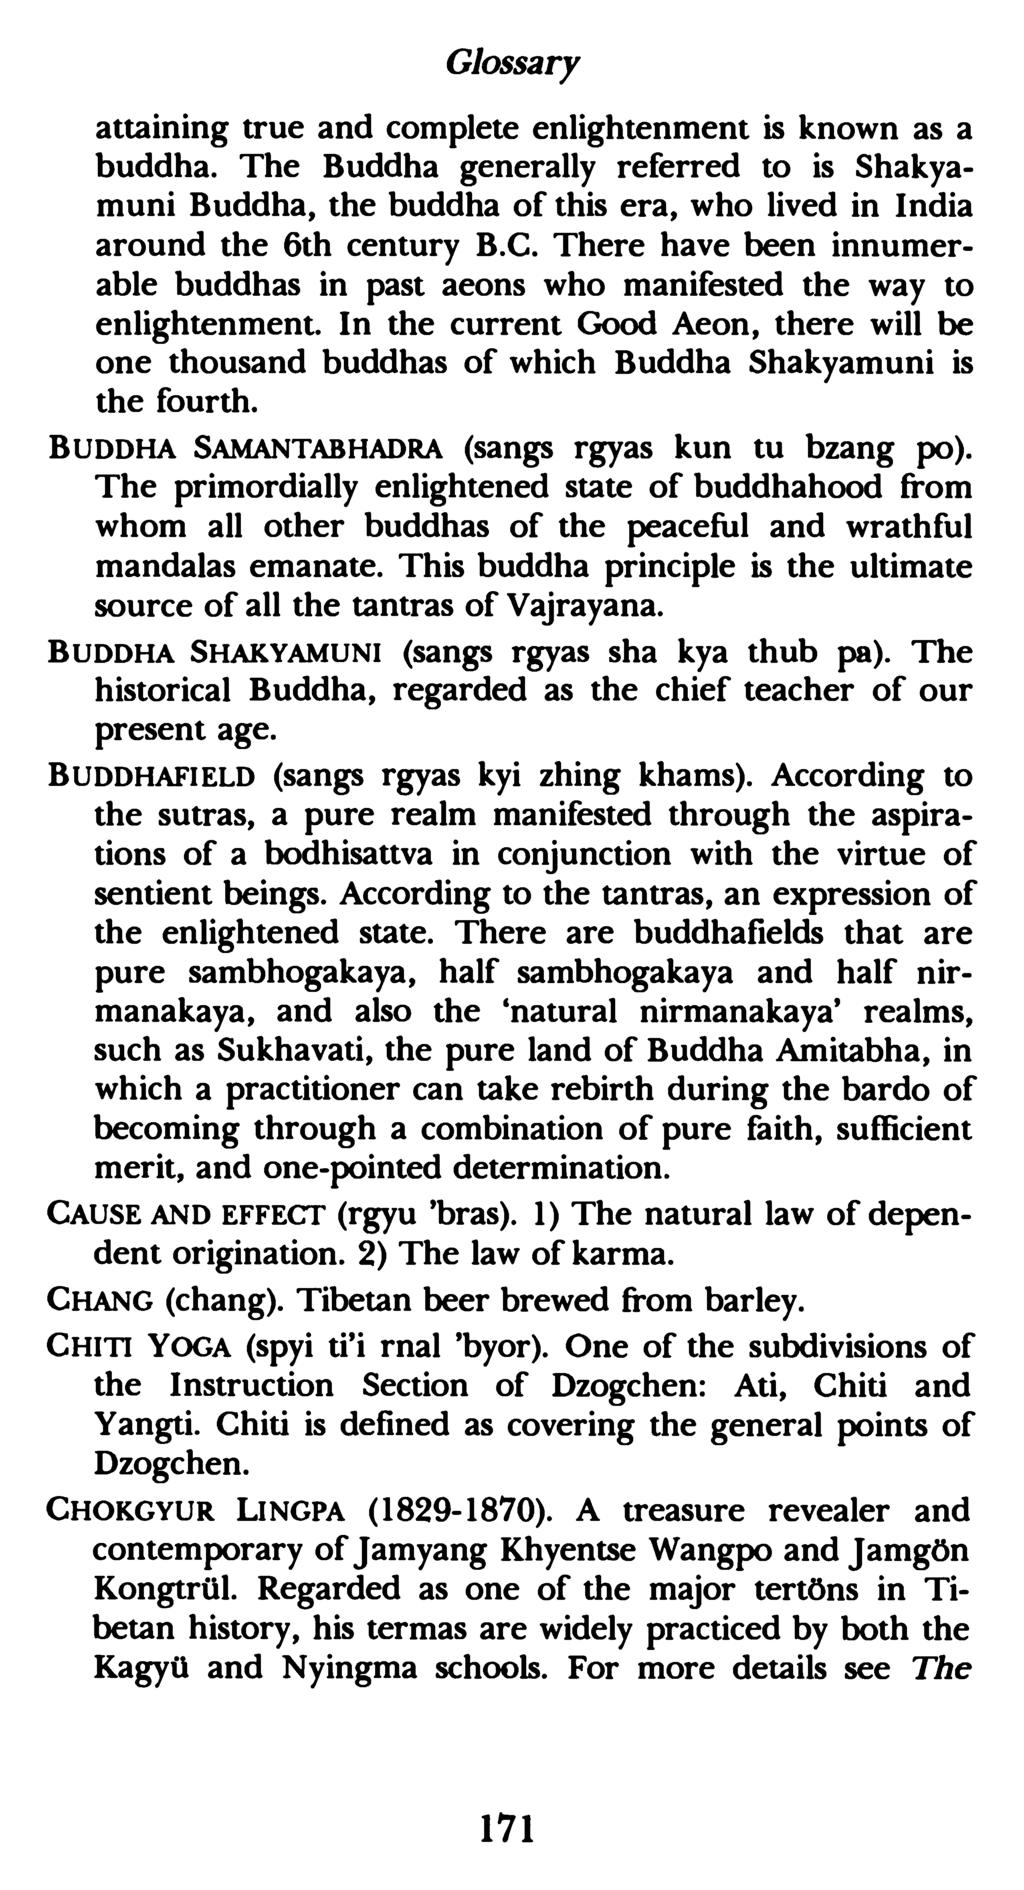 Glossary attaining true and complete enlightenment is known as a buddha. The Buddha generally referred to is Shakyamuni Buddha, the buddha of this era, who lived in India around the 6th century B.C.